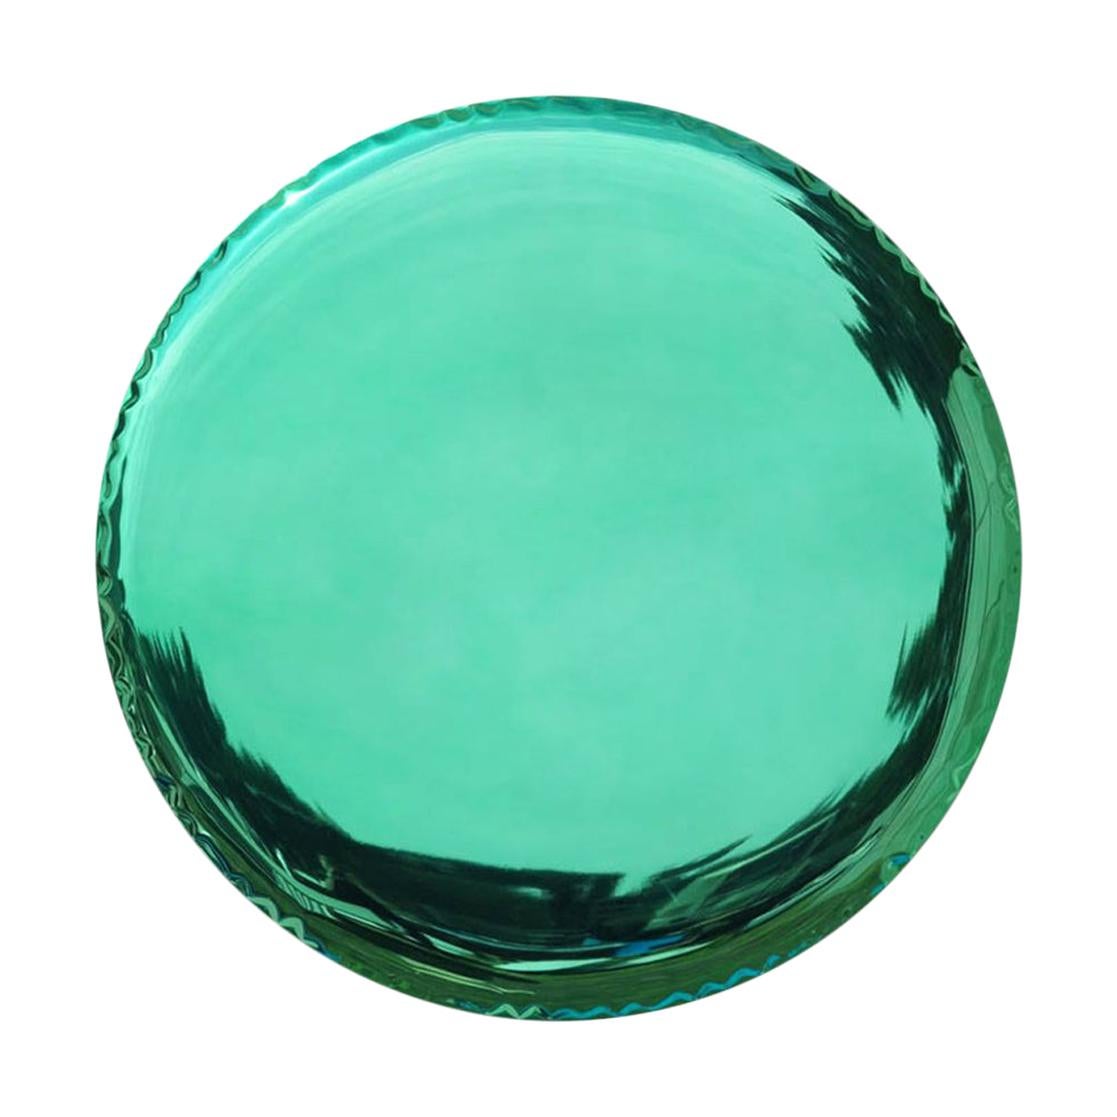 Oko 150 Polished Emerald Color Stainless Steel Wall Mirror by Zieta